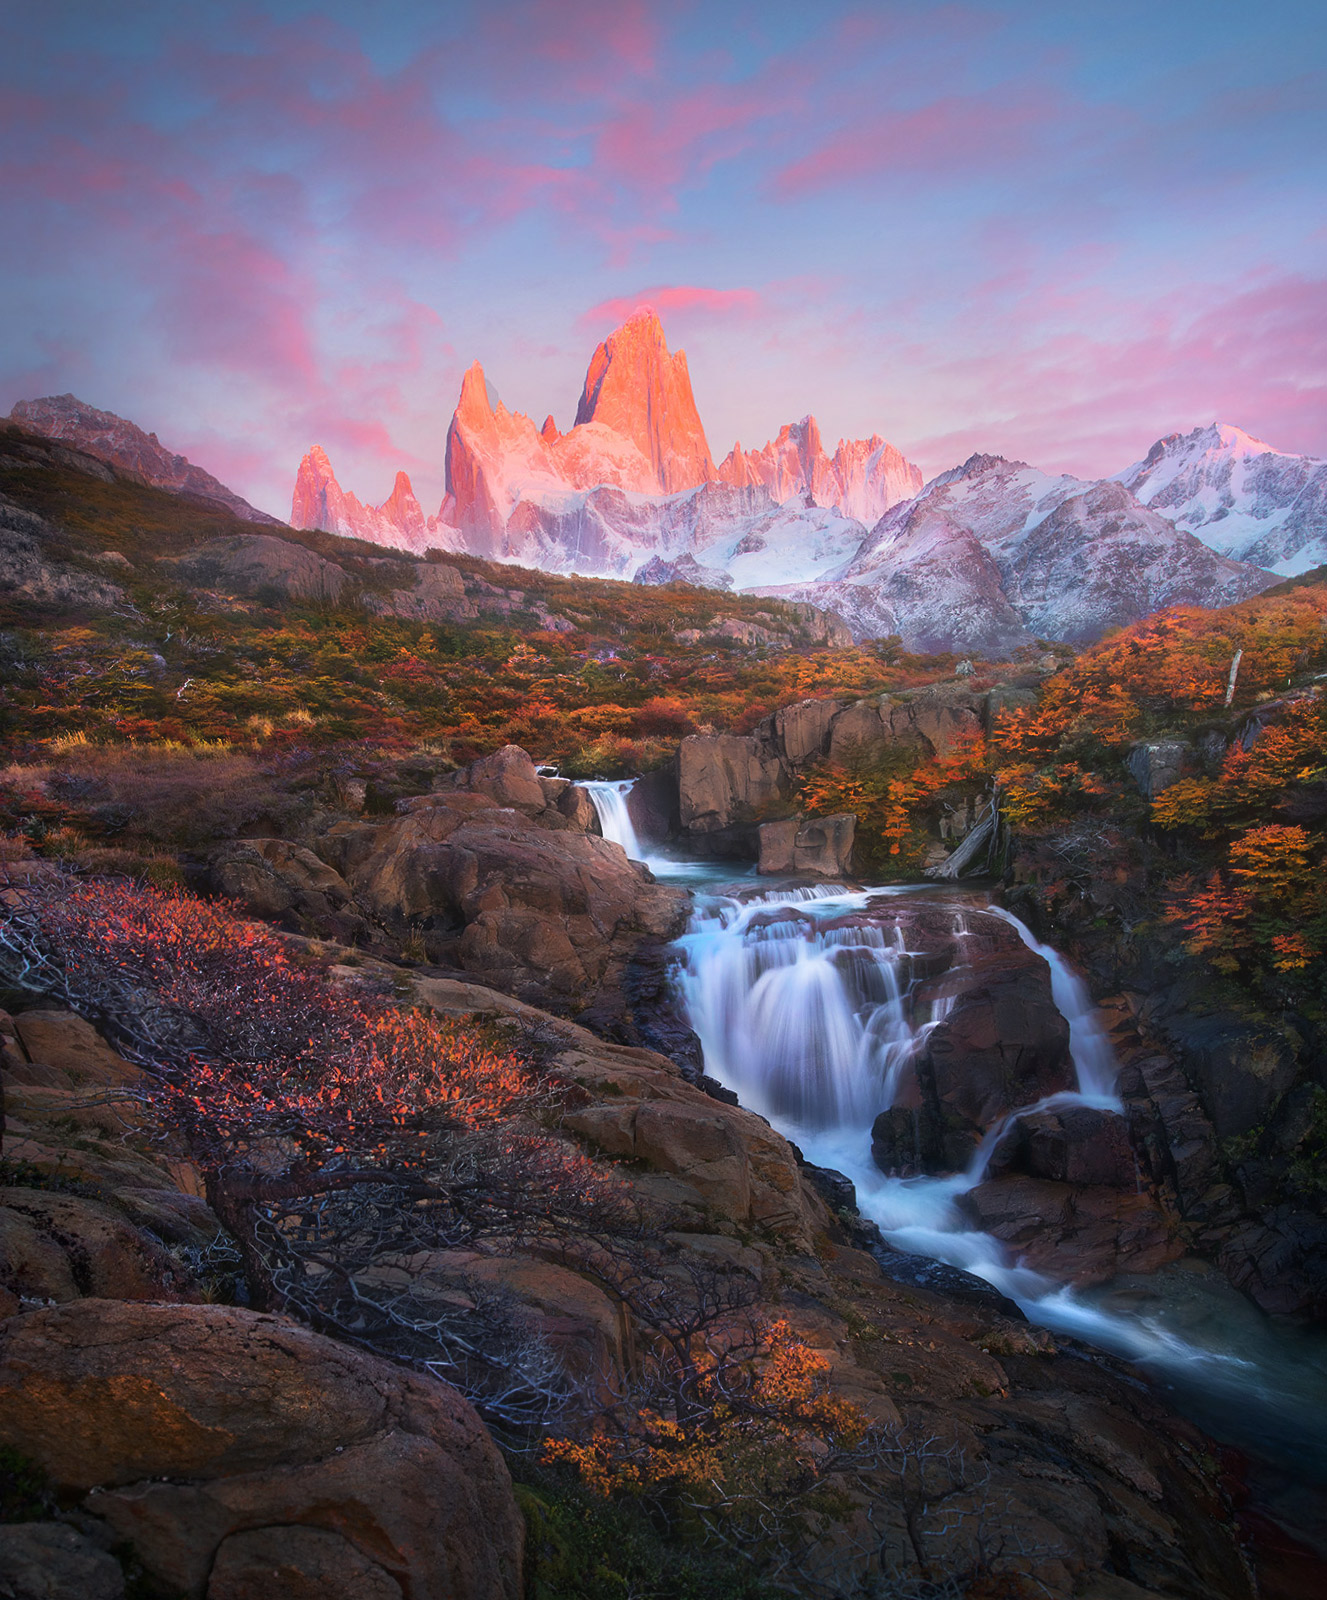 The spectacular peaks of the Fitz Roy ridge dawn in the background of fall colors and cascades, Patagonia.